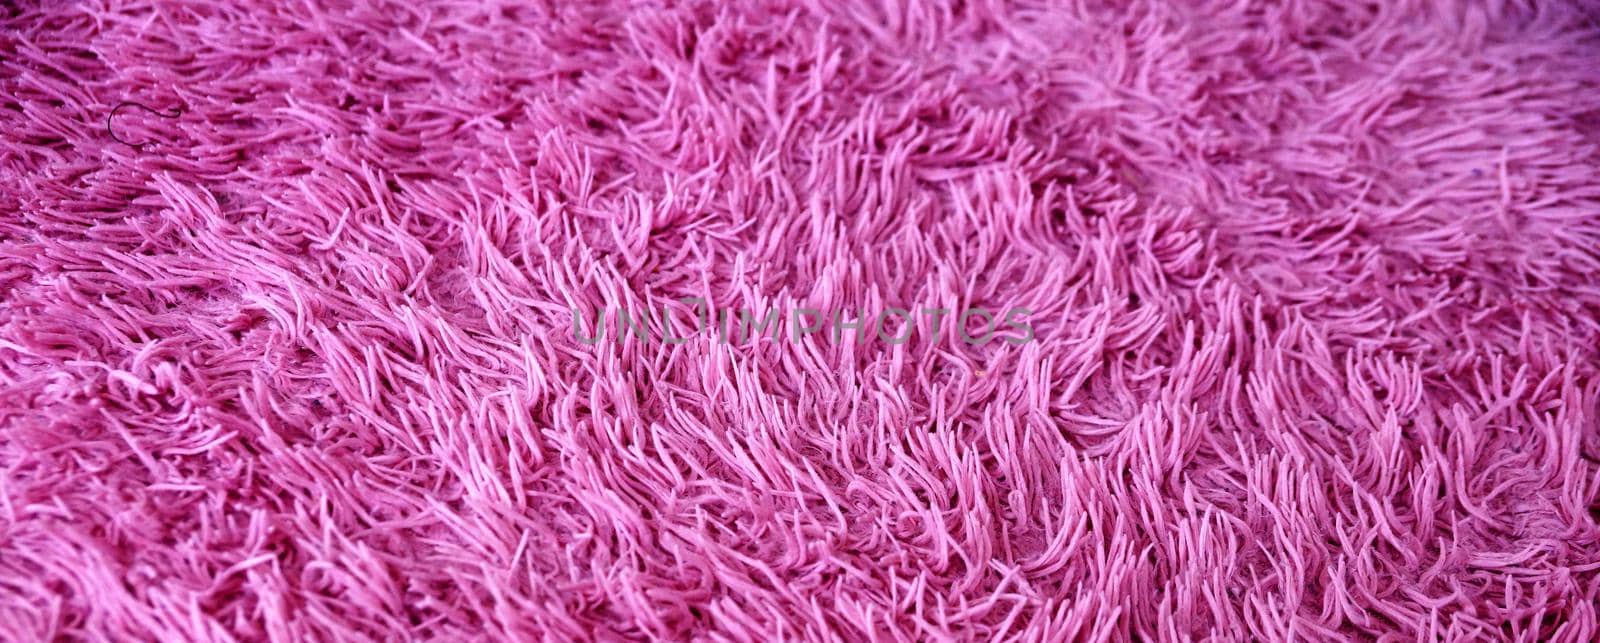 faux pink fur close up for textile background by Annado